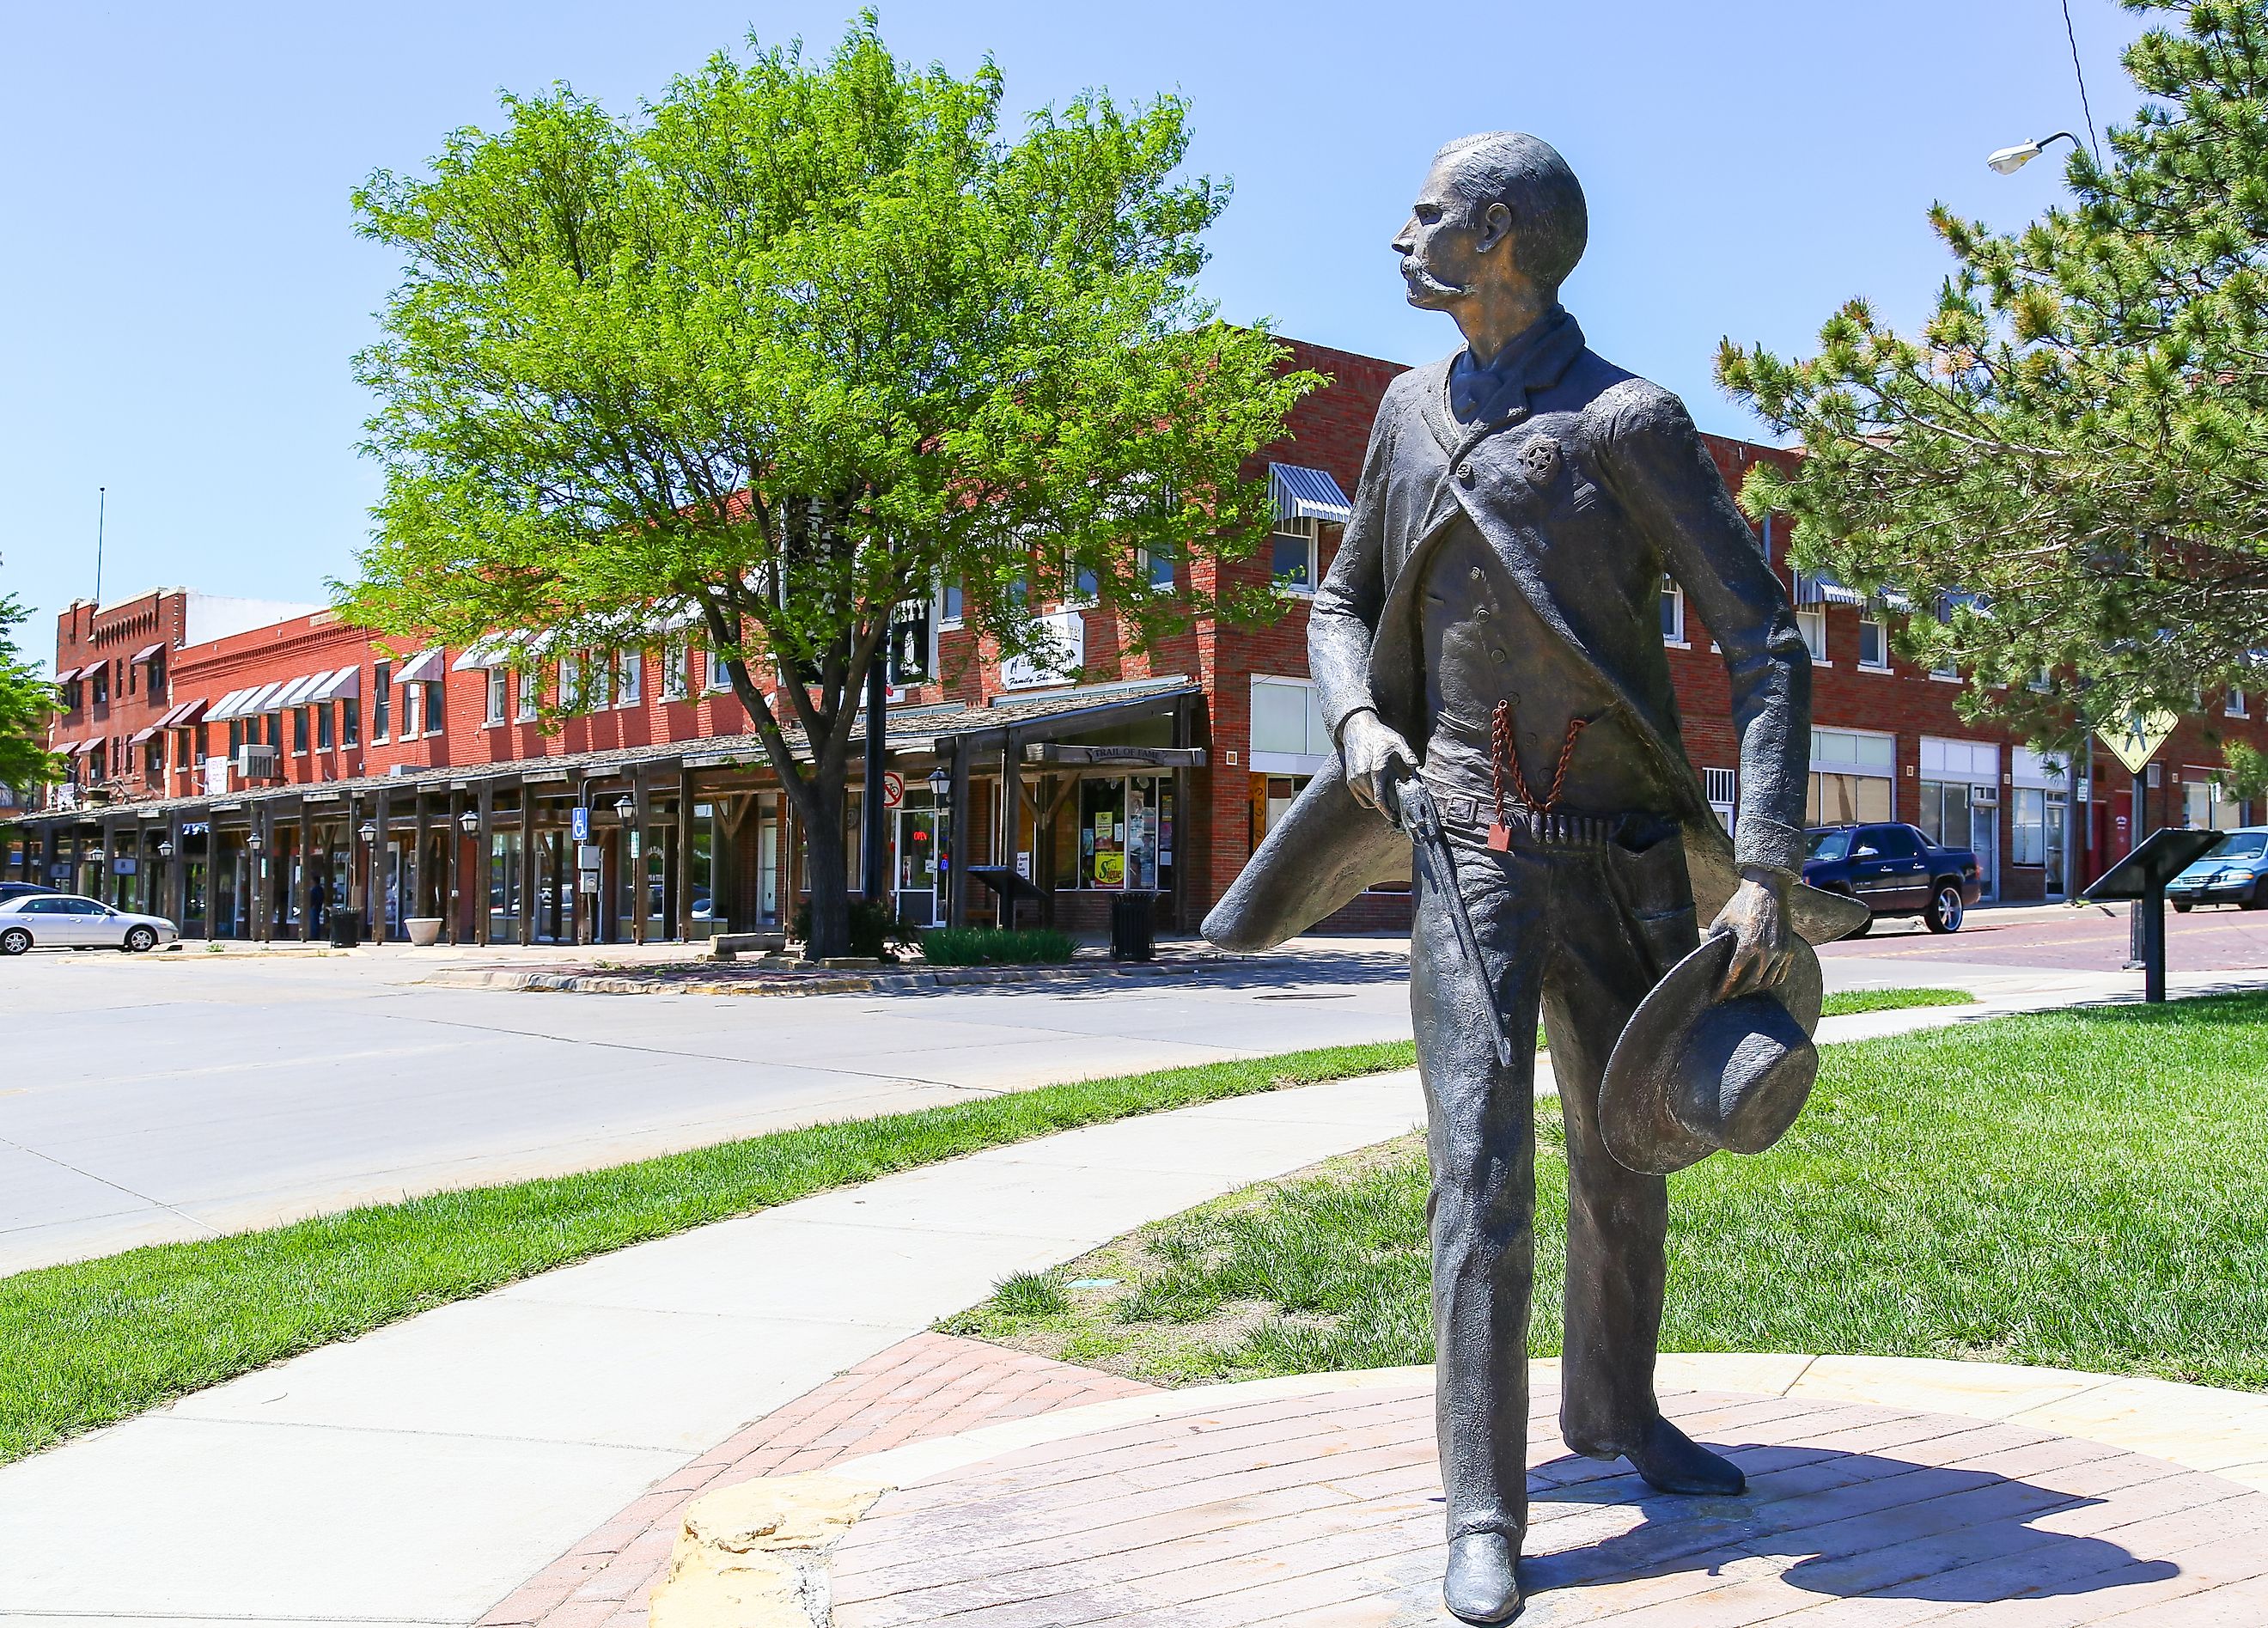 A statue along the Trail of Fame in Dodge City, Kansas. Editorial credit: Michael Rosebrock / Shutterstock.com